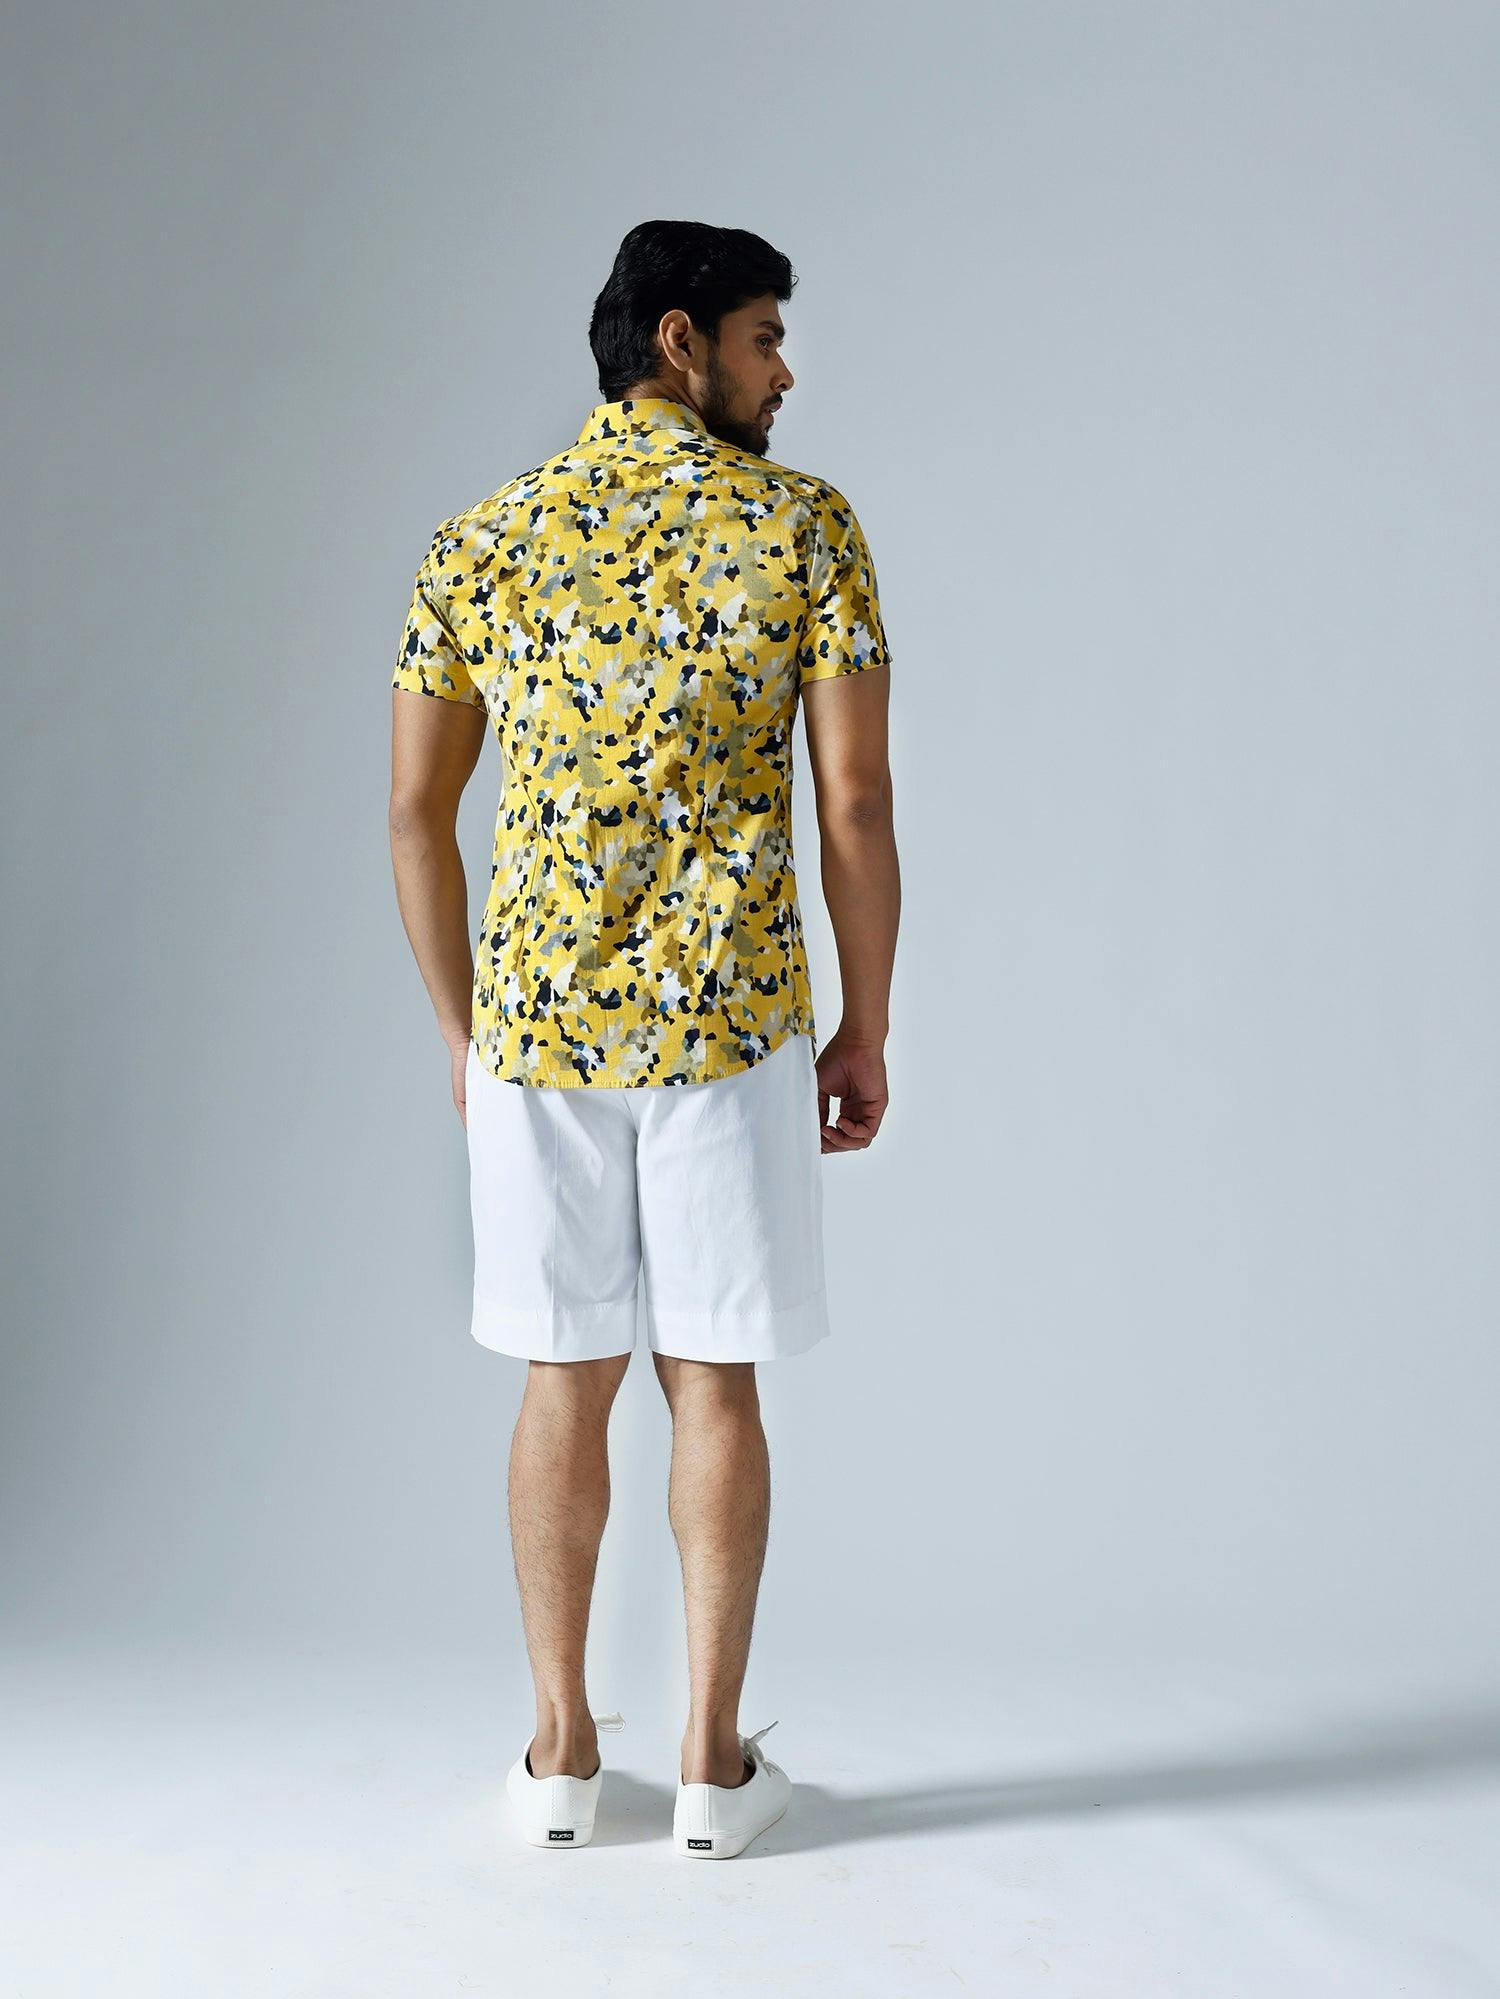 Thumbnail preview #2 for Pixelated Yellow Half sleeves Shirt With White Shorts